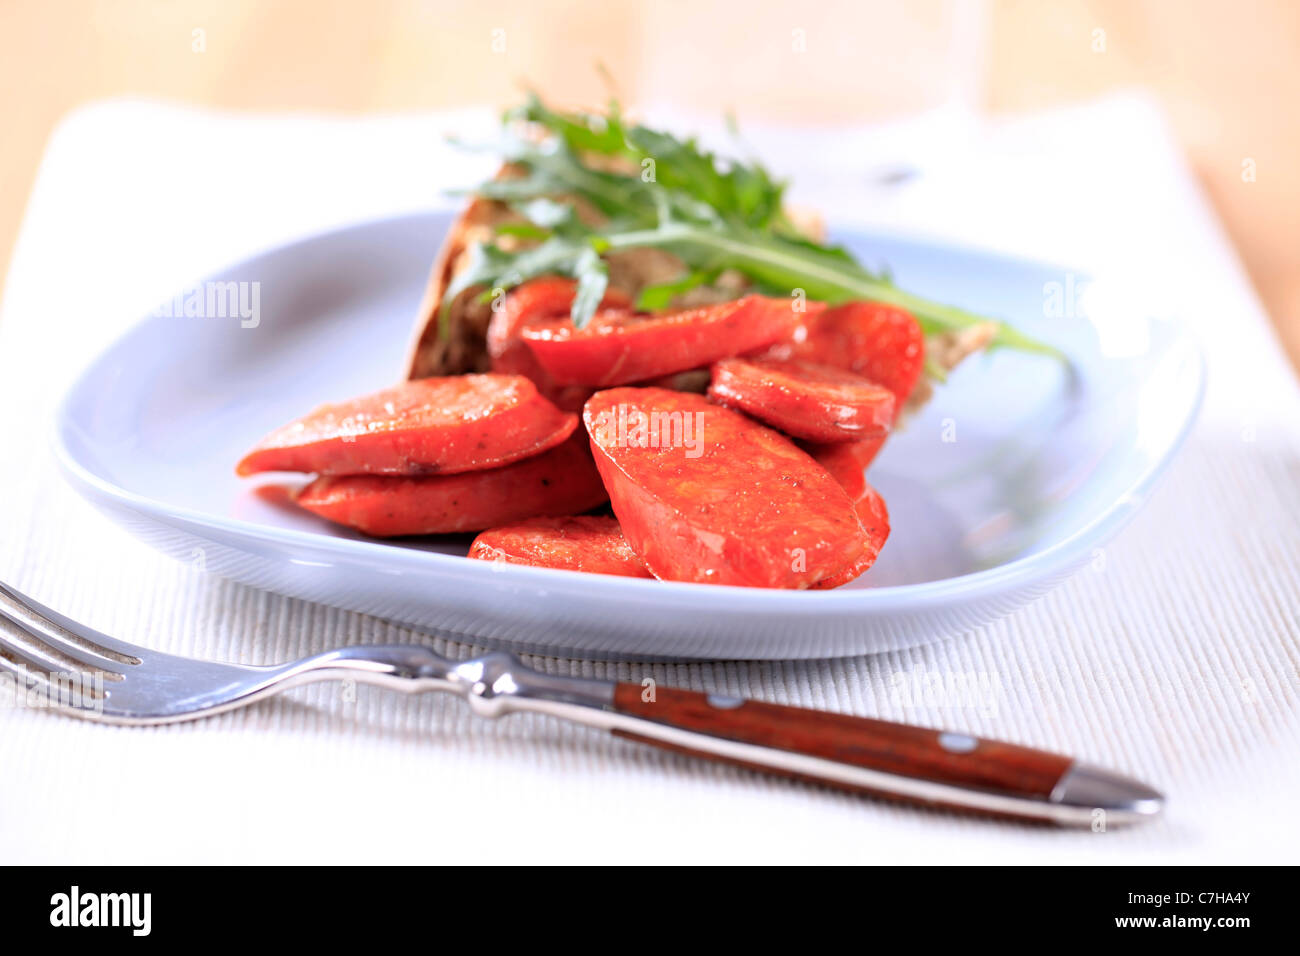 Slices of Italian sausage with red pepper flavor Stock Photo